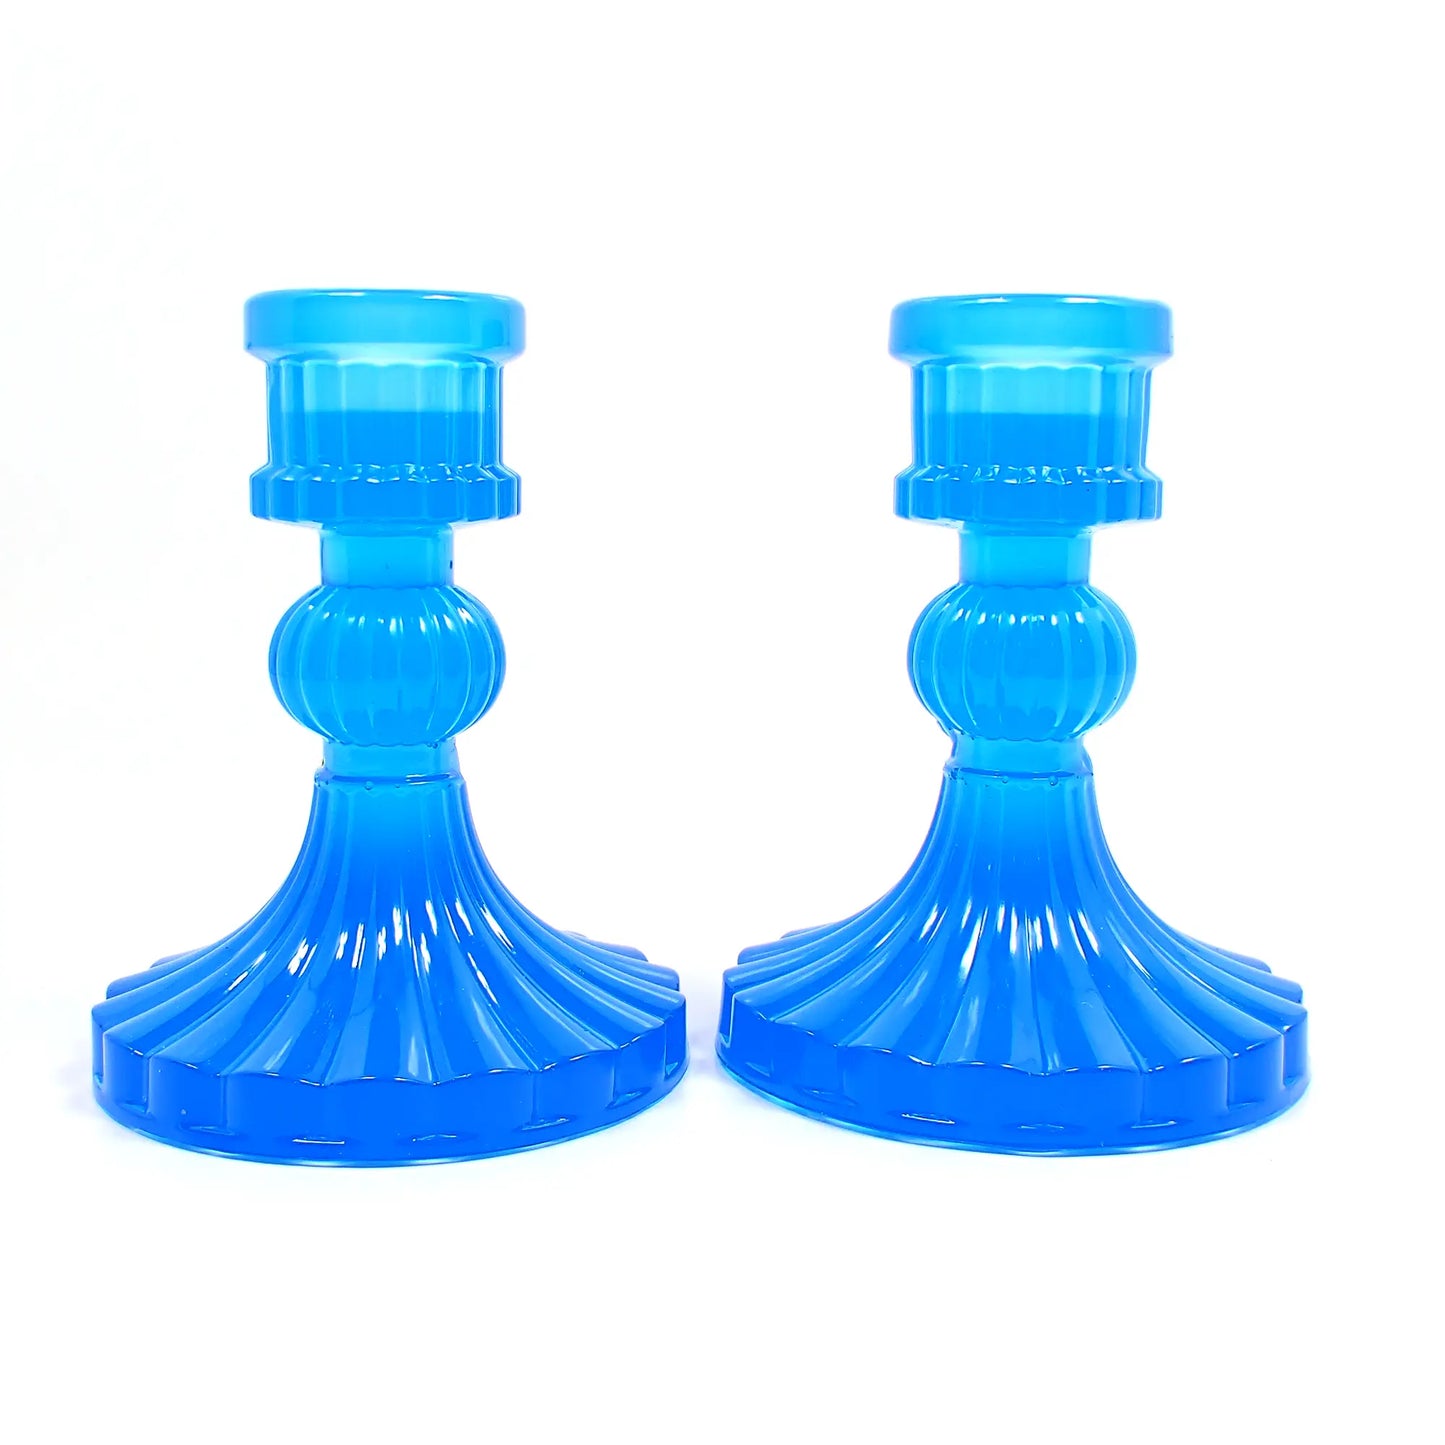 Set of Two Vintage Style Handmade Semi Translucent Neon Blue Resin Candlestick Holders